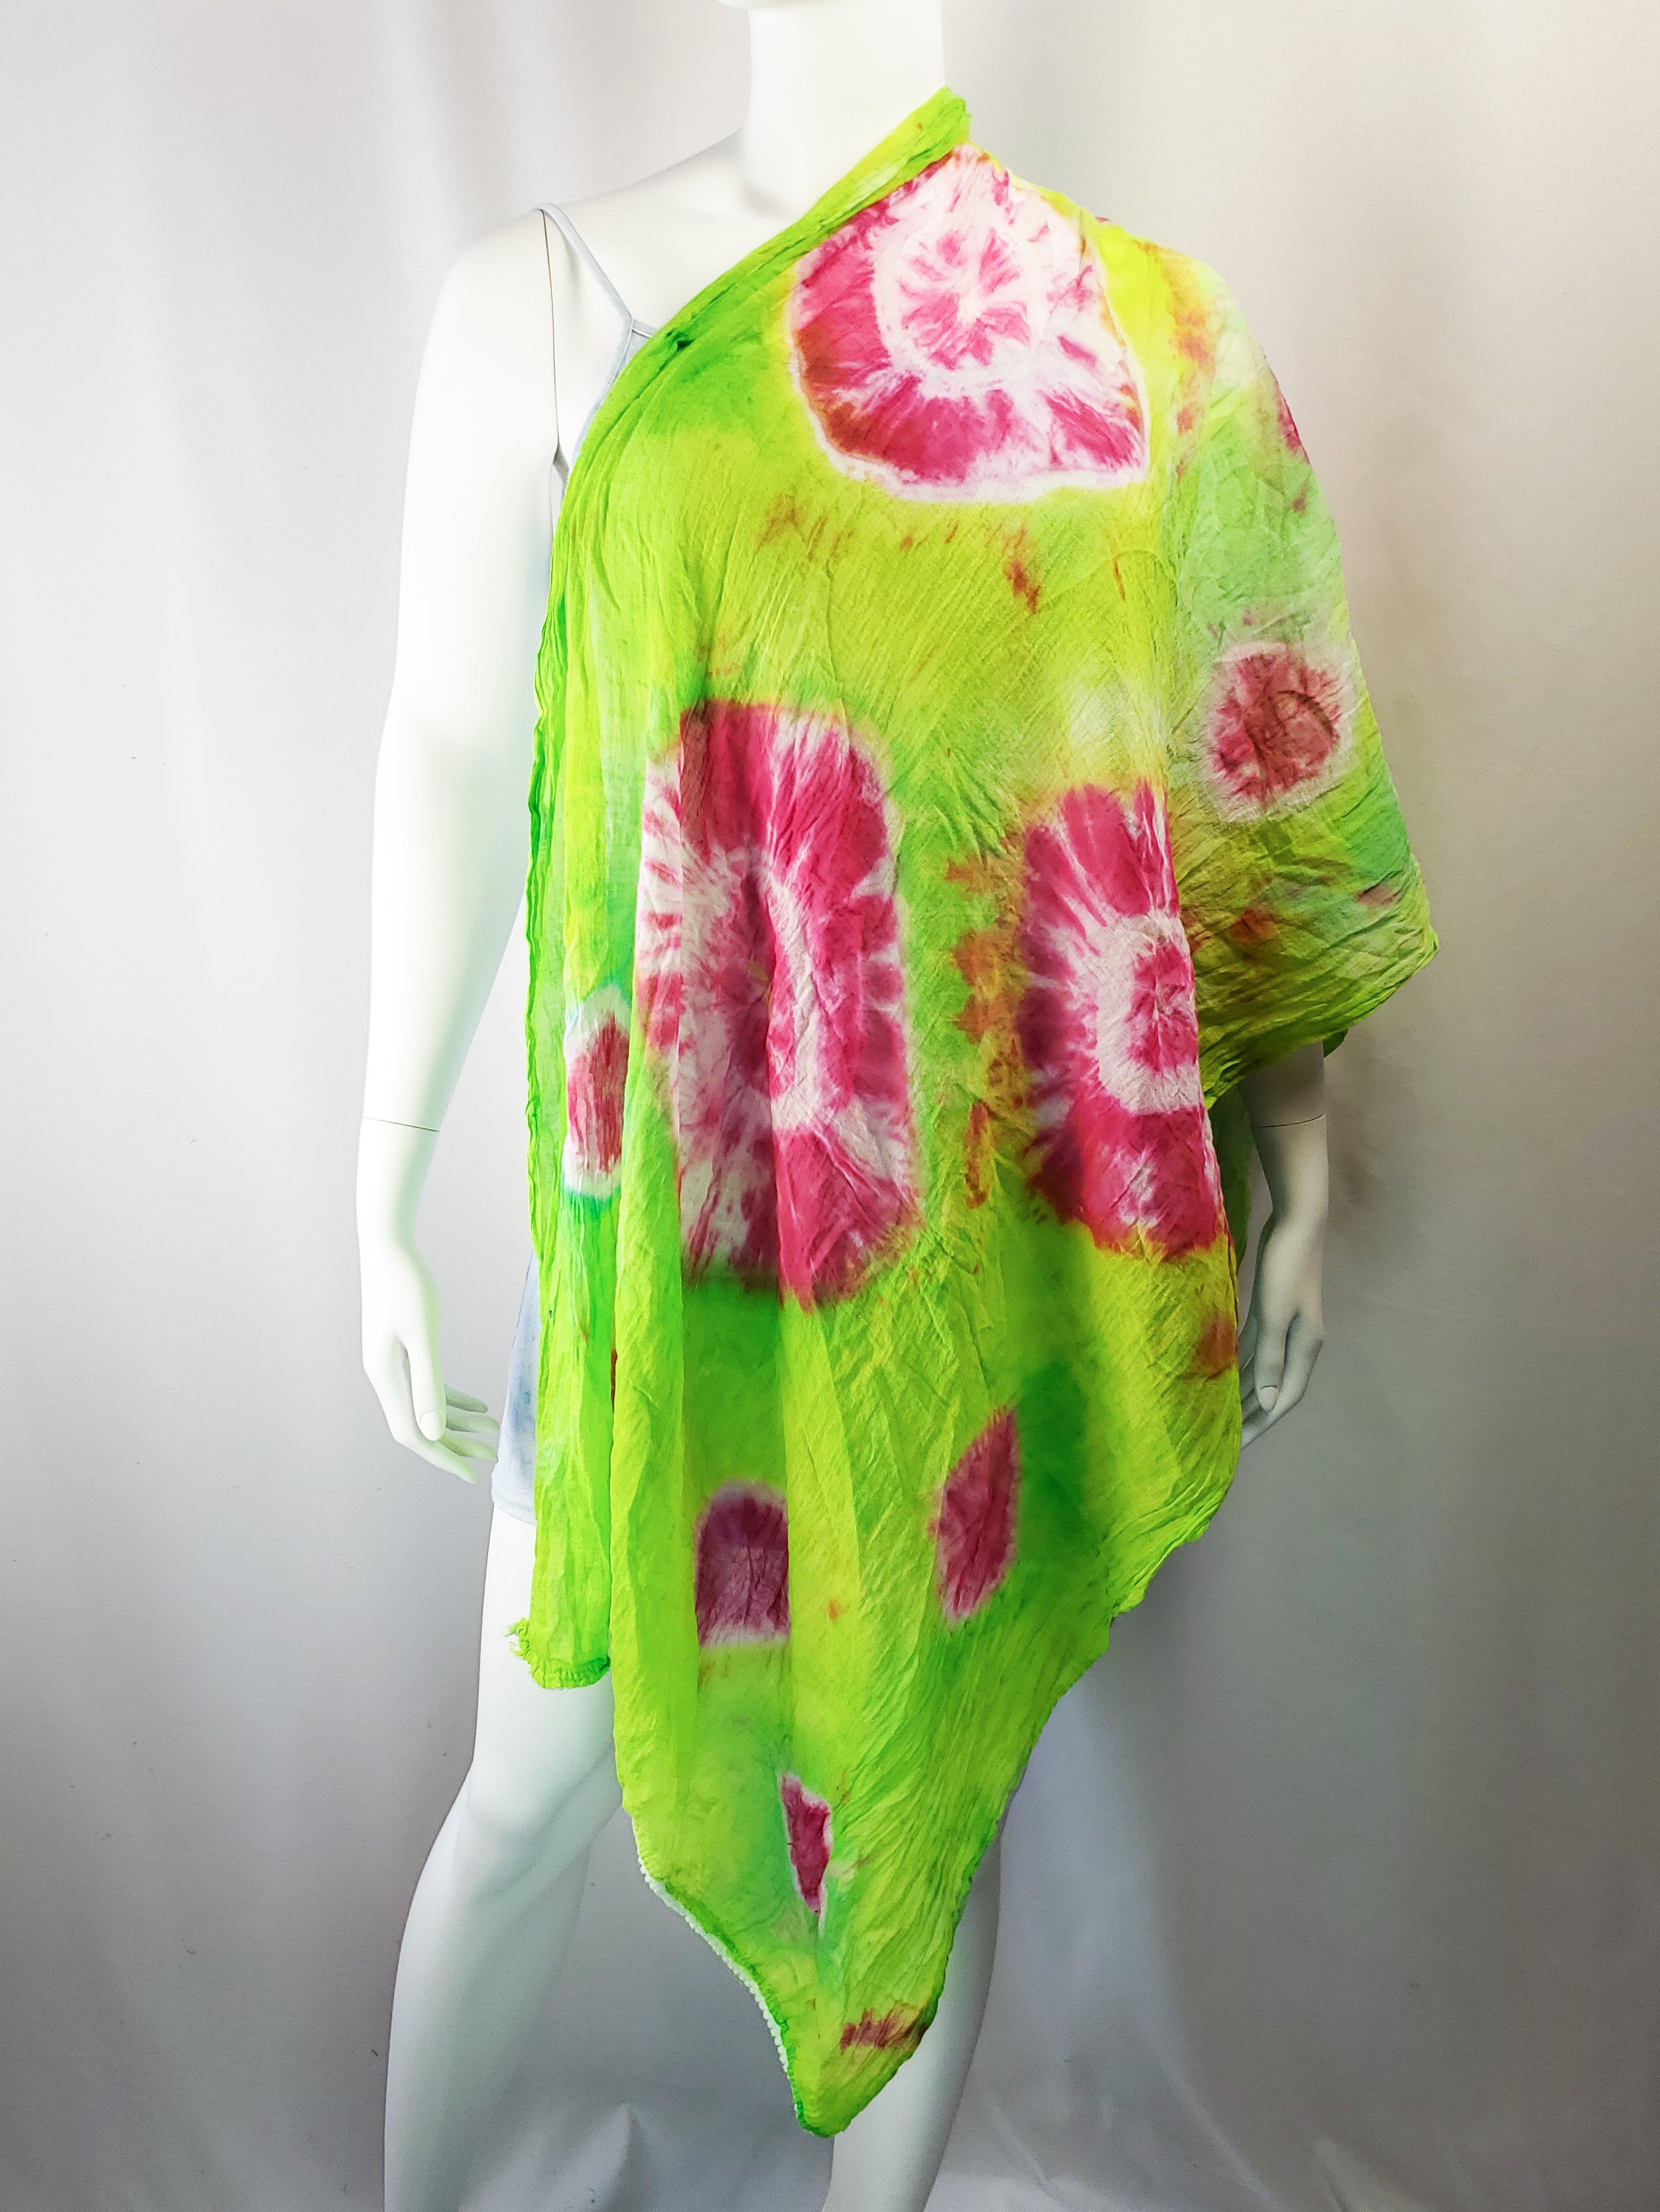 Hand Painted Rose Garden Crinkle Bandhani Shawl/Scarf - The Caffeinated Raven